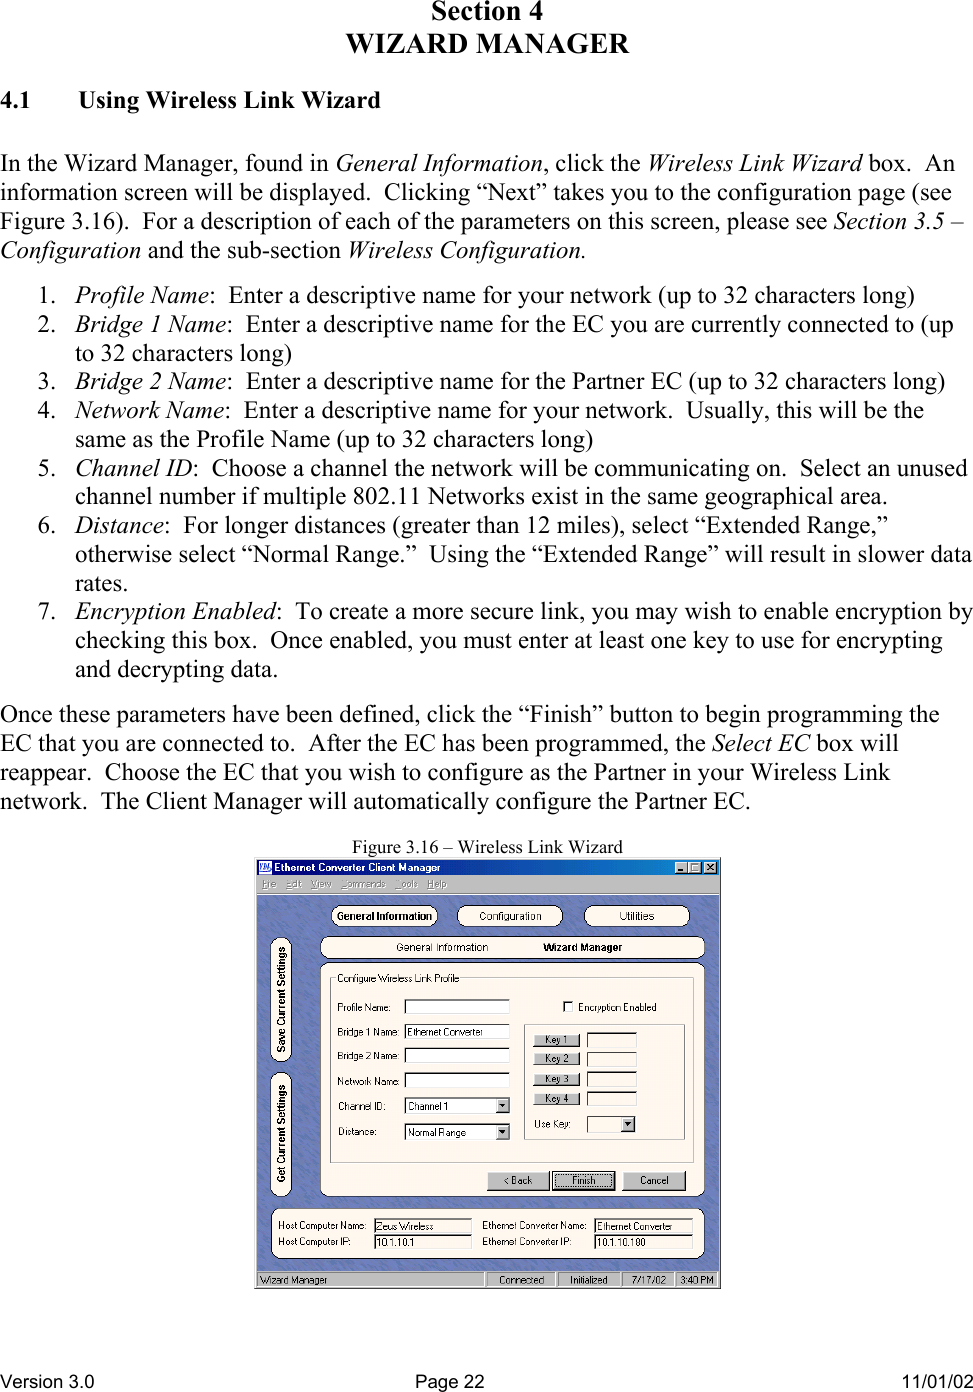 Version 3.0  Page 22  11/01/02 Section 4 WIZARD MANAGER 4.1  Using Wireless Link Wizard  In the Wizard Manager, found in General Information, click the Wireless Link Wizard box.  An information screen will be displayed.  Clicking “Next” takes you to the configuration page (see Figure 3.16).  For a description of each of the parameters on this screen, please see Section 3.5 – Configuration and the sub-section Wireless Configuration.    1.  Profile Name:  Enter a descriptive name for your network (up to 32 characters long) 2.  Bridge 1 Name:  Enter a descriptive name for the EC you are currently connected to (up to 32 characters long) 3.  Bridge 2 Name:  Enter a descriptive name for the Partner EC (up to 32 characters long) 4.  Network Name:  Enter a descriptive name for your network.  Usually, this will be the same as the Profile Name (up to 32 characters long) 5.  Channel ID:  Choose a channel the network will be communicating on.  Select an unused channel number if multiple 802.11 Networks exist in the same geographical area. 6.  Distance:  For longer distances (greater than 12 miles), select “Extended Range,” otherwise select “Normal Range.”  Using the “Extended Range” will result in slower data rates. 7.  Encryption Enabled:  To create a more secure link, you may wish to enable encryption by checking this box.  Once enabled, you must enter at least one key to use for encrypting and decrypting data.  Once these parameters have been defined, click the “Finish” button to begin programming the EC that you are connected to.  After the EC has been programmed, the Select EC box will reappear.  Choose the EC that you wish to configure as the Partner in your Wireless Link network.  The Client Manager will automatically configure the Partner EC.  Figure 3.16 – Wireless Link Wizard  